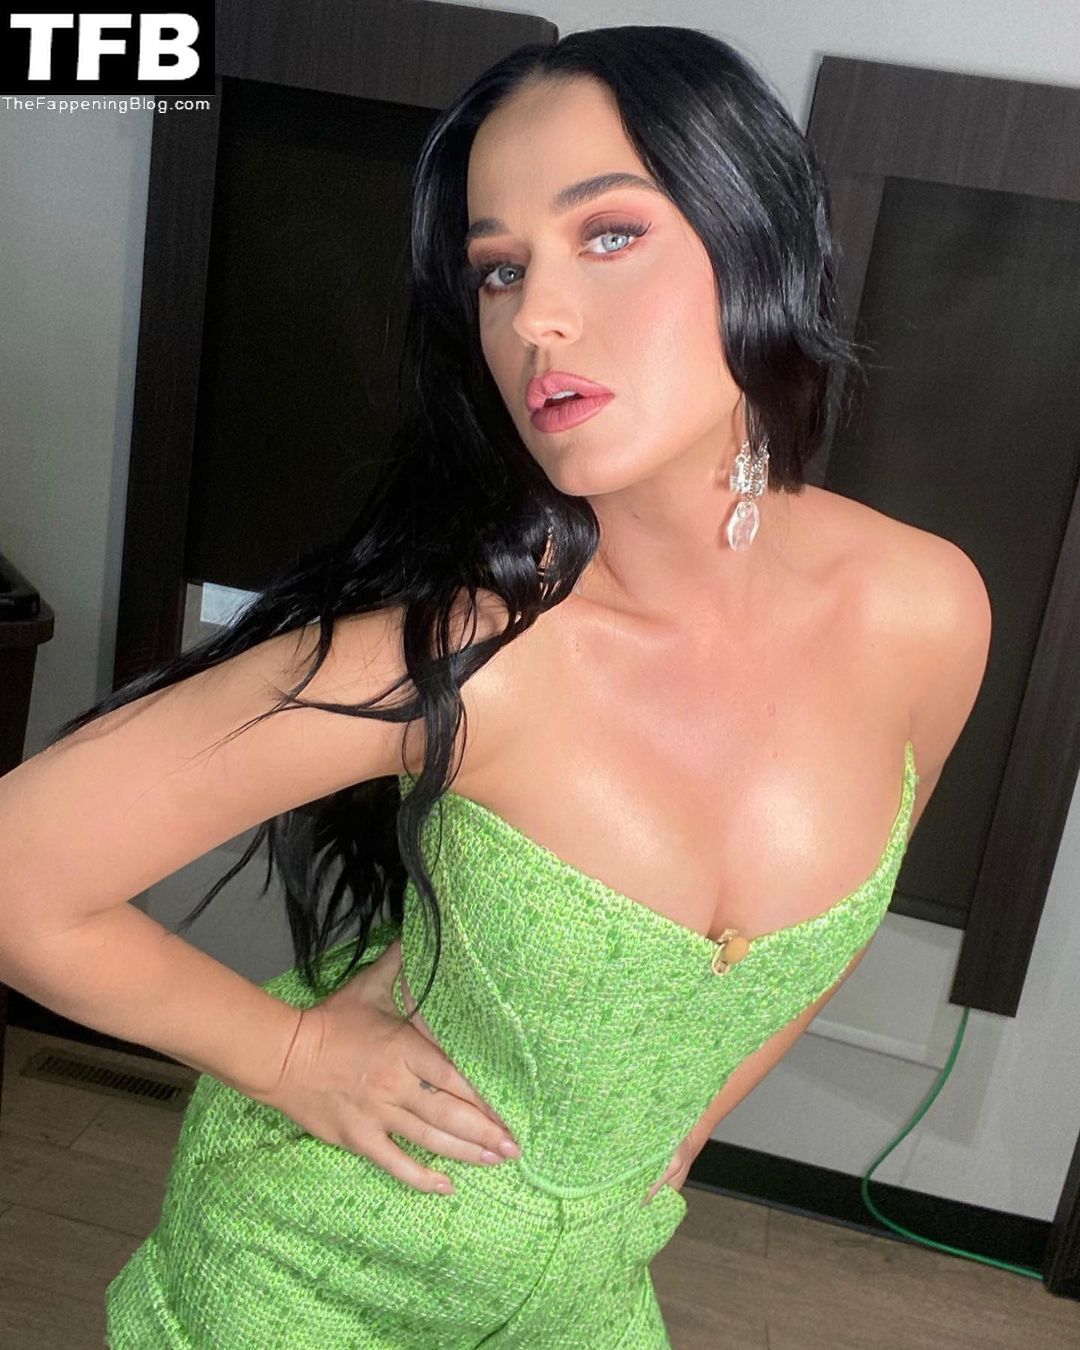 katy-perry-cleavage-210199-thefappeningblog.com_.jpg